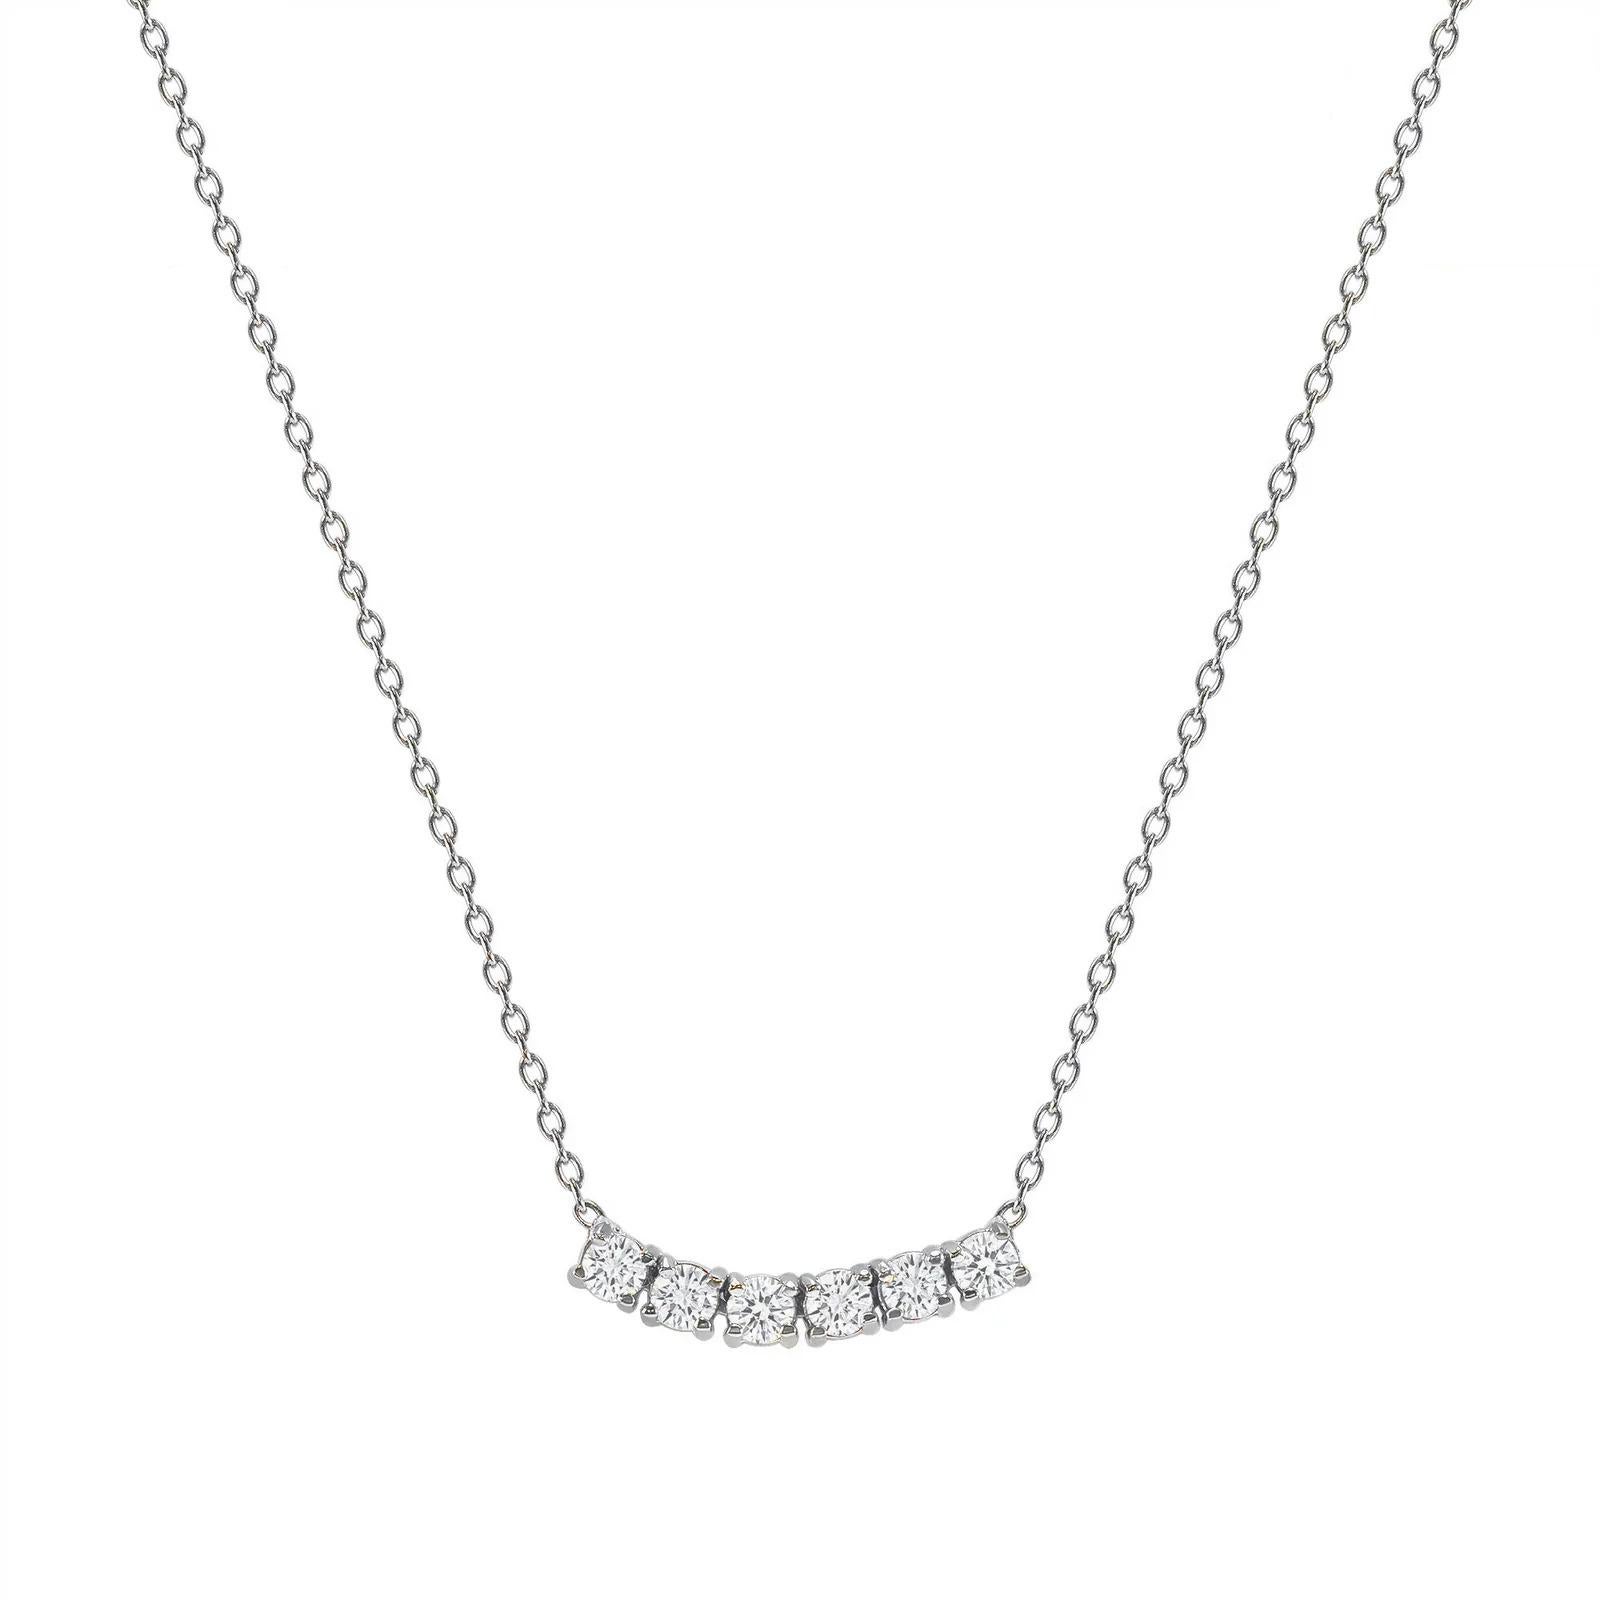 This petite, curved diamond necklace is crafted with gorgeous 14k gold set with six round diamonds.  

Gold: 14k 
Diamond Total Carats: 2 ct
Diamond Cut: Round (6 diamonds)
Diamond Clarity: VS
Diamond Color: F
Color: White Gold
Necklace Length: 22